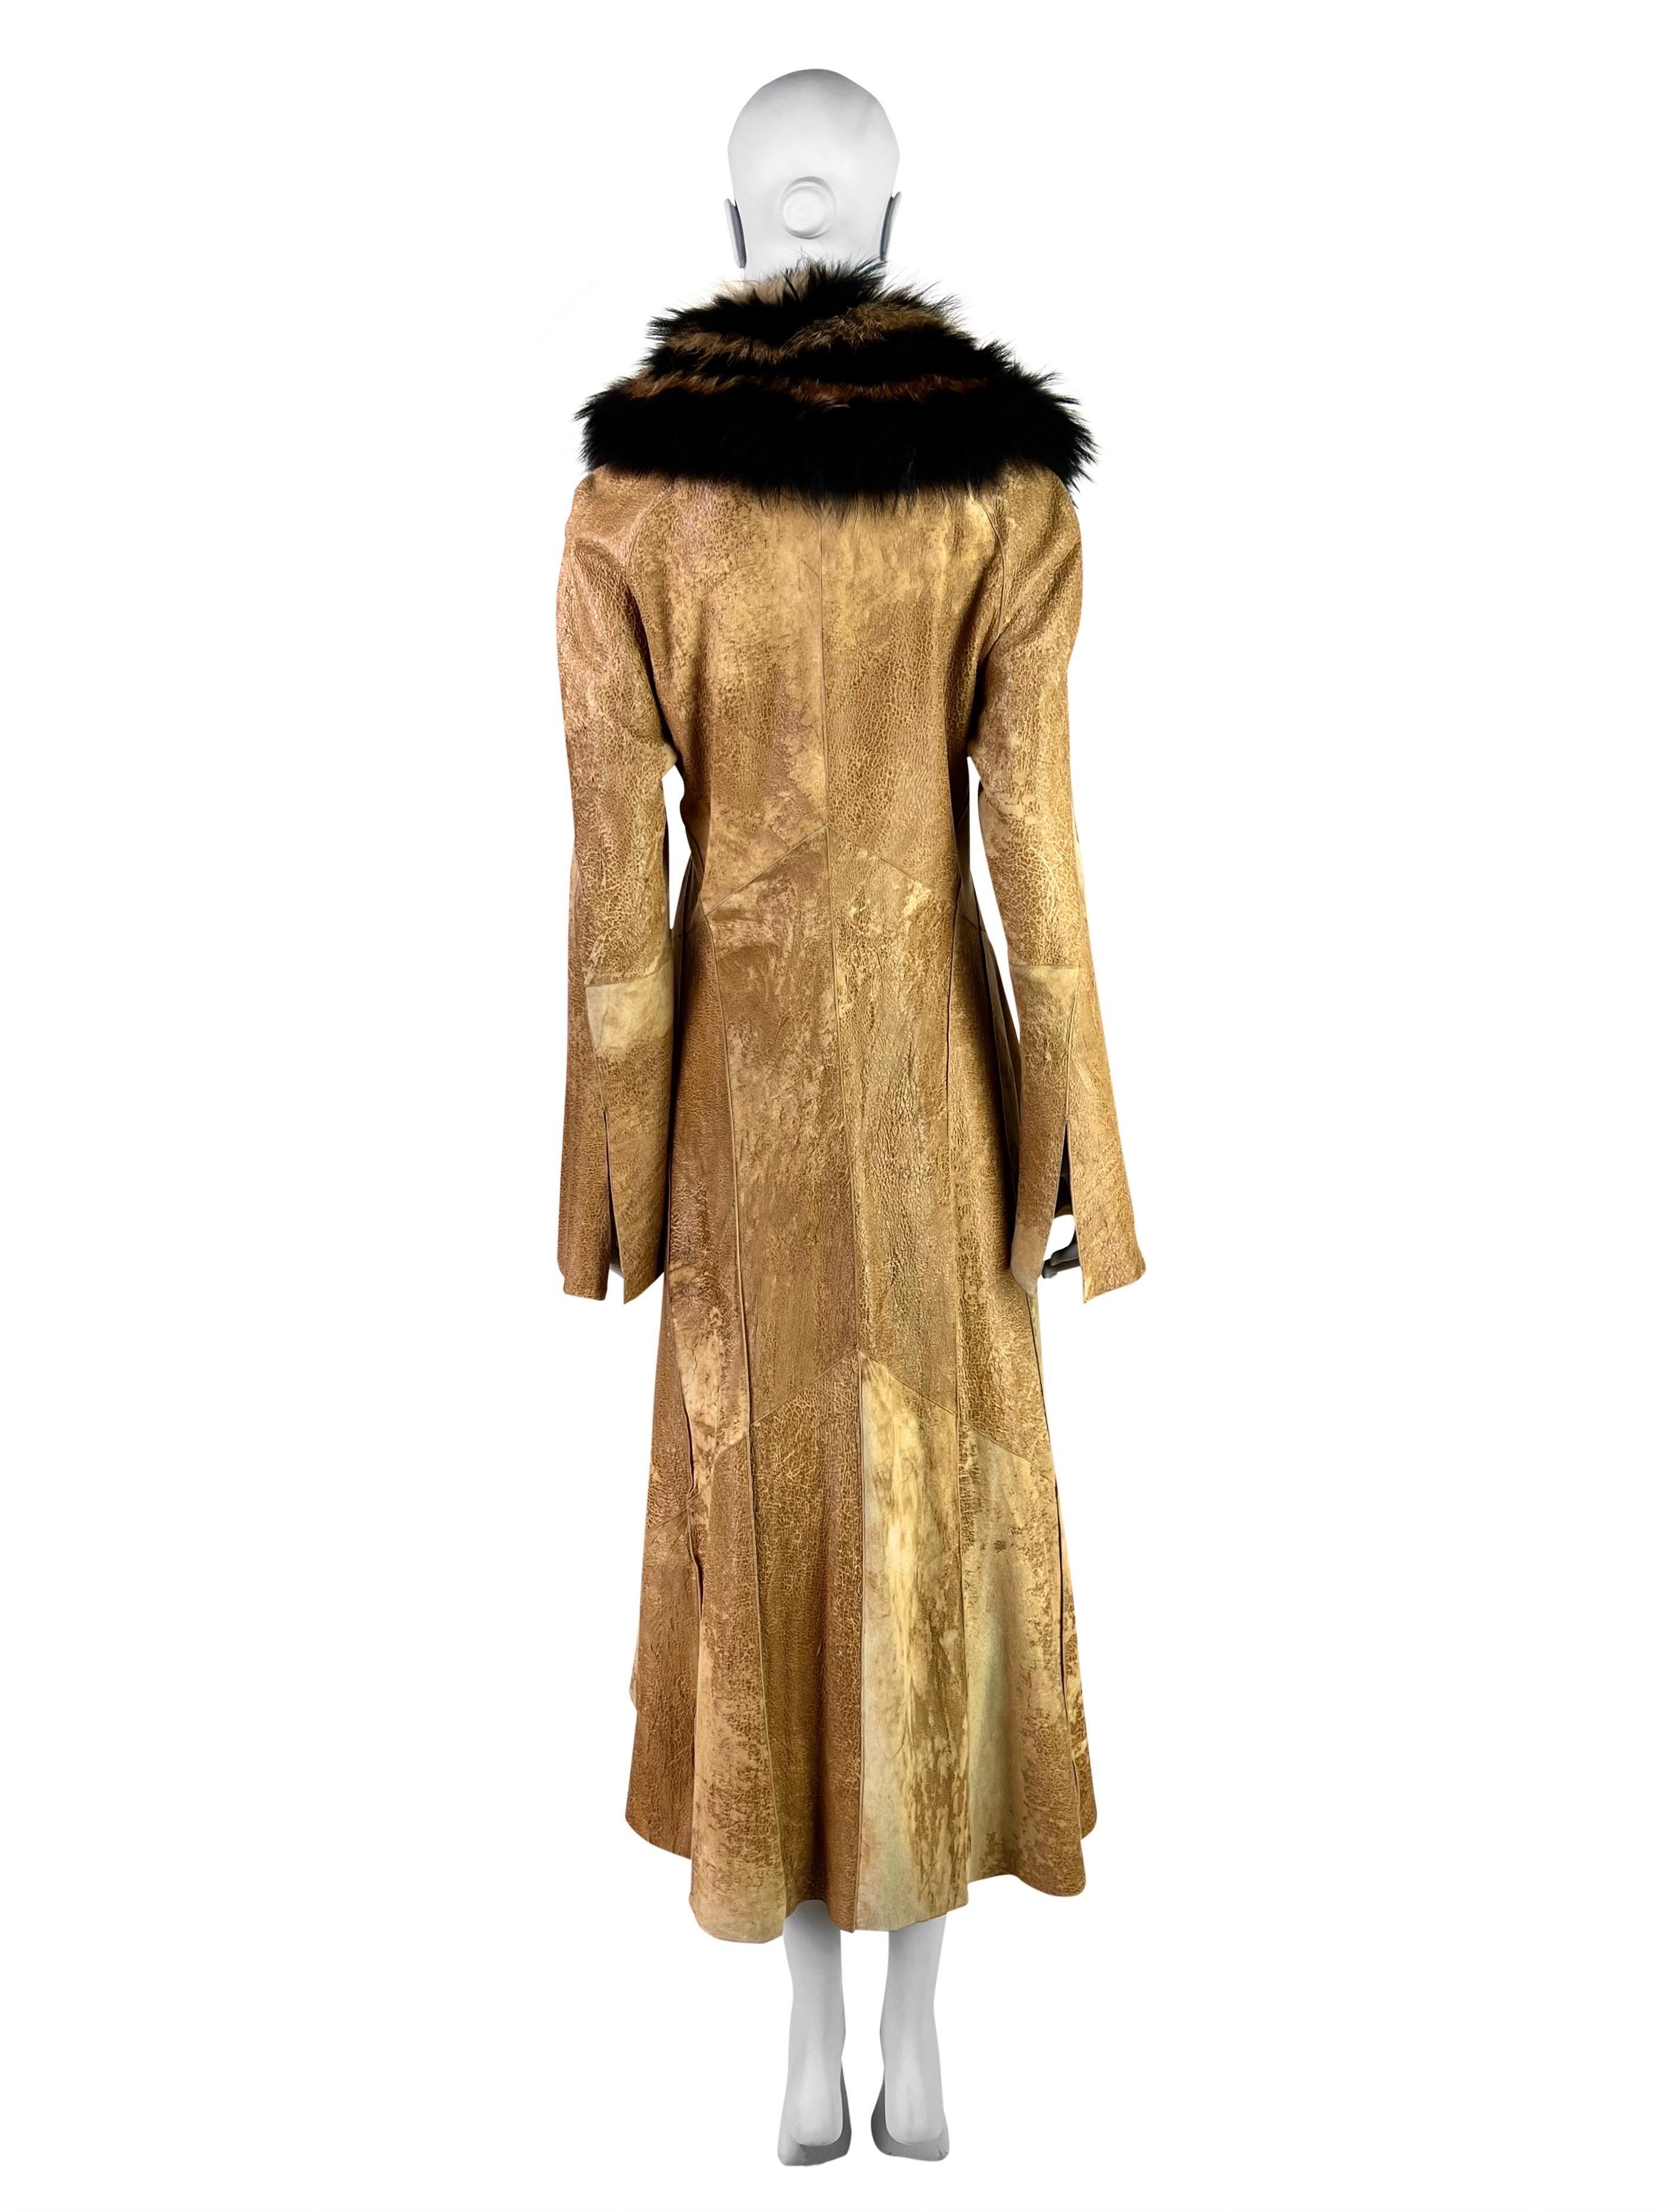 Roberto Cavalli Fall 2002 Leather Coat with Fox Fur For Sale 2